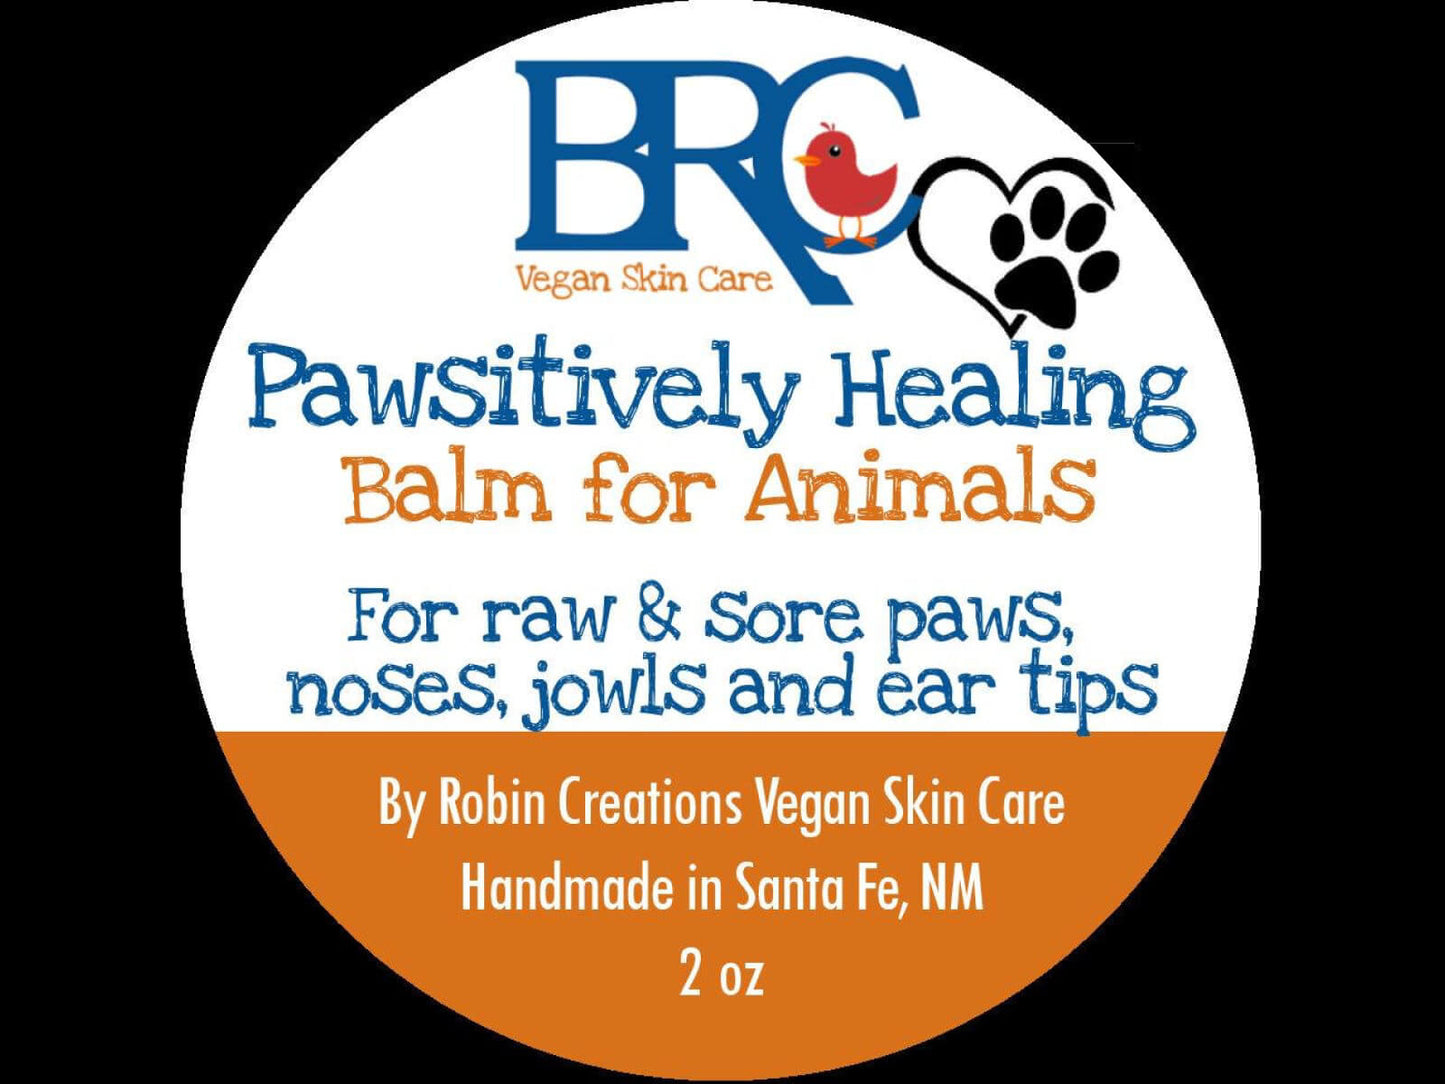 Healing Balm for Paws, Noses, Jowls